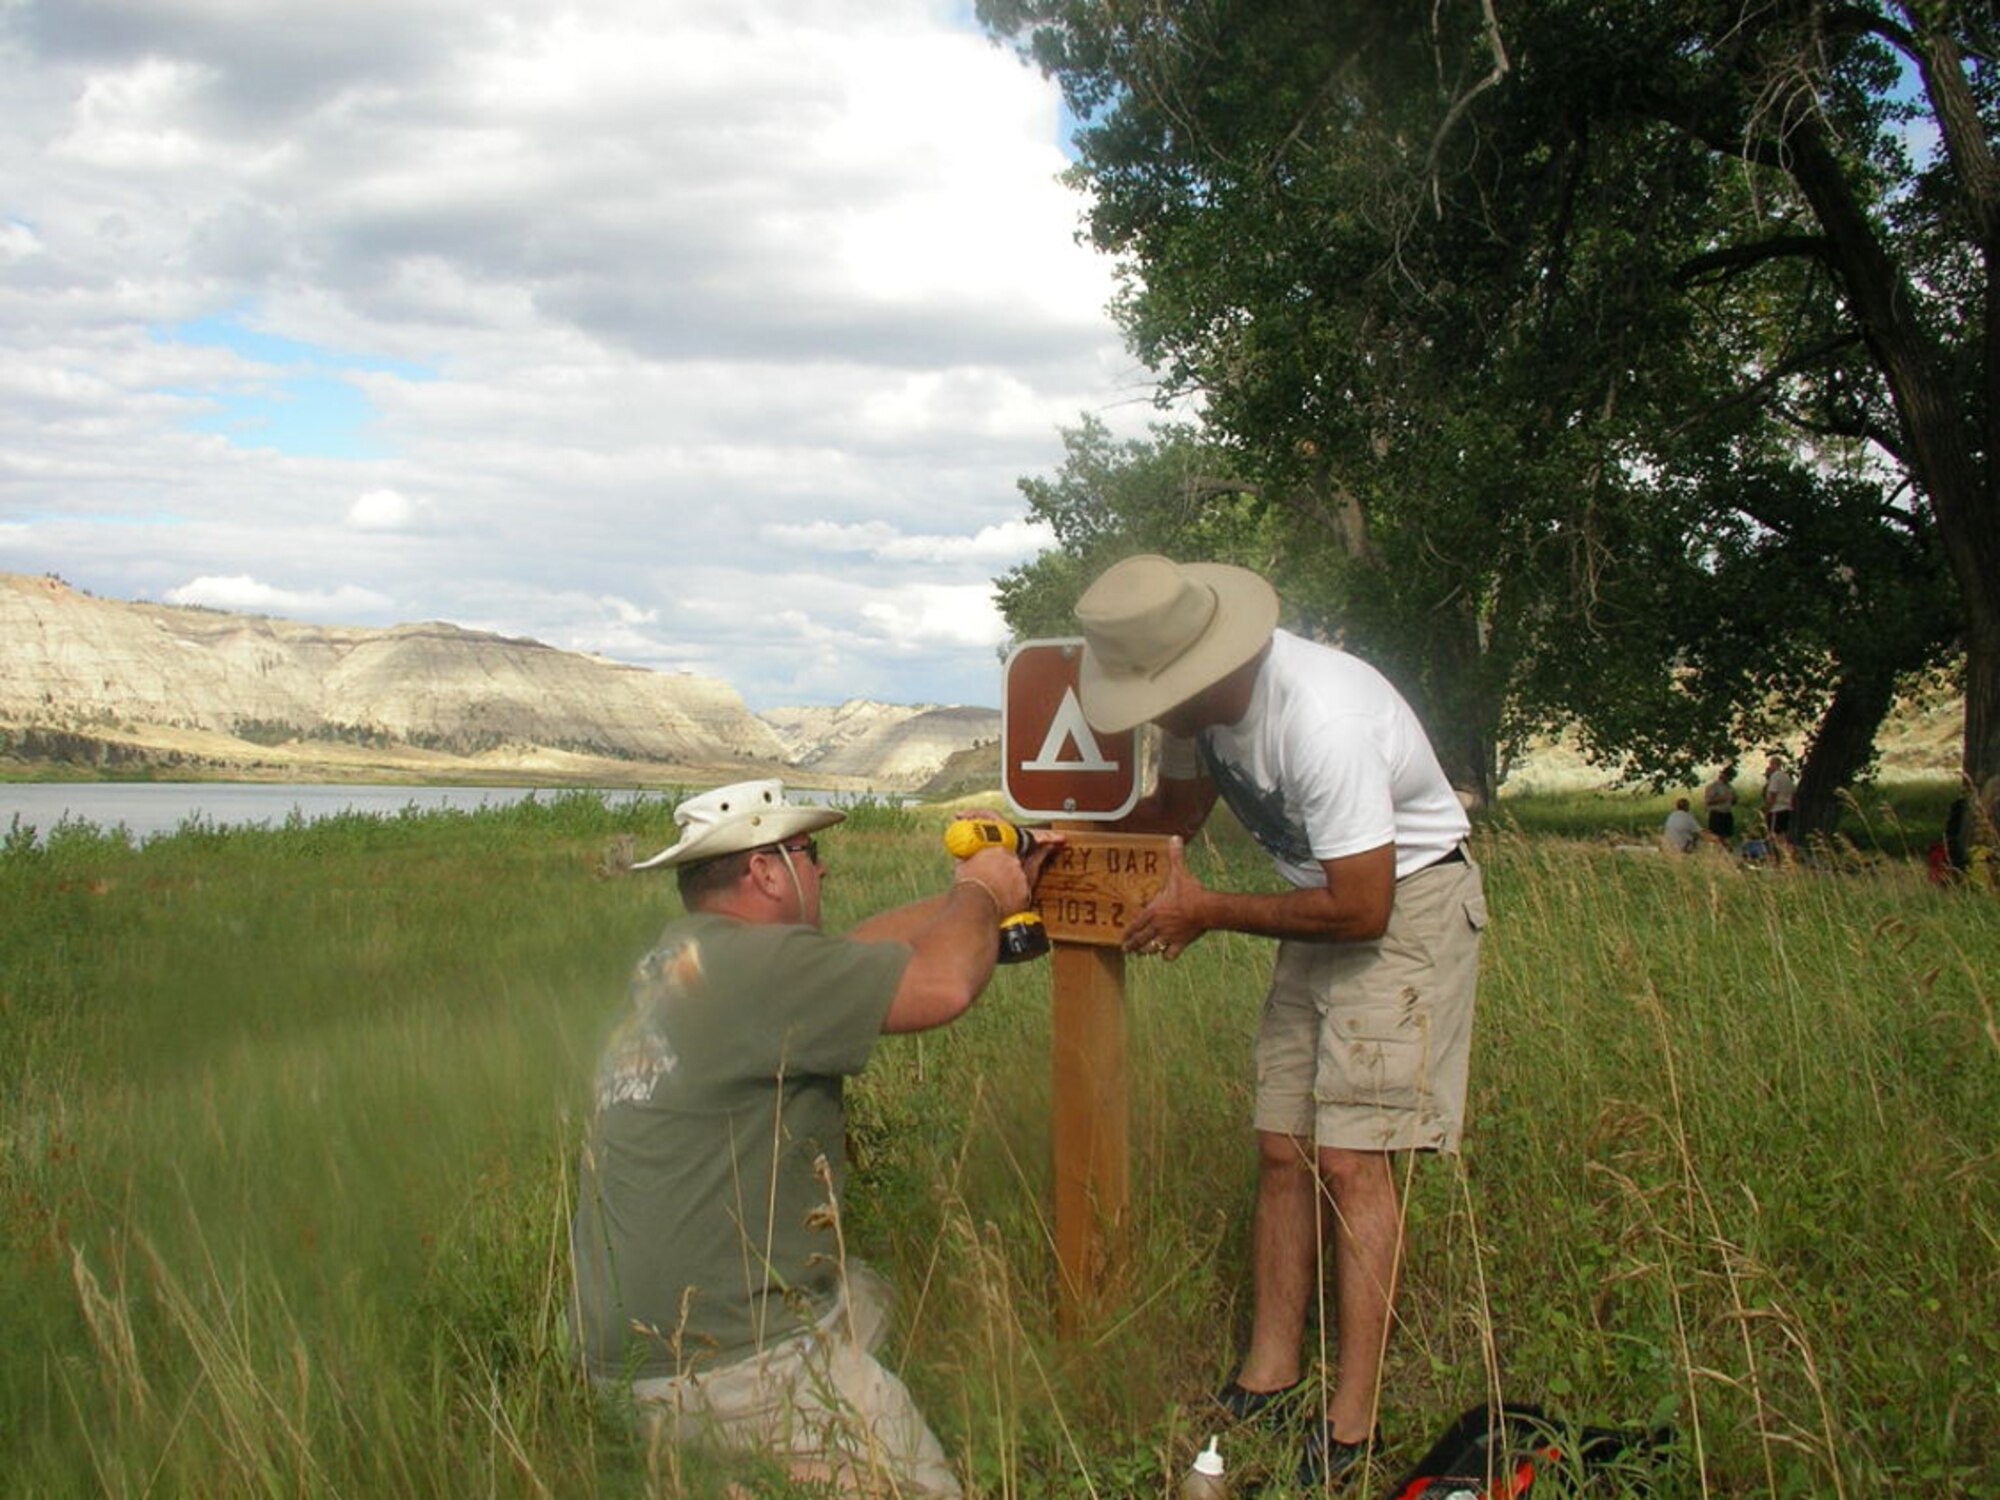 Chief Master Sgt. Larry Wilson (left) and Col. Steve Asher (right) work together to place a campsite marker along the Missouri River while serving as voluntary river patrols for the Bureau of Land Management. The two Security Forces Group leaders organized a volunteer force of their Airmen to assist the BLM with several large projects during 2007. (Courtesy photo)